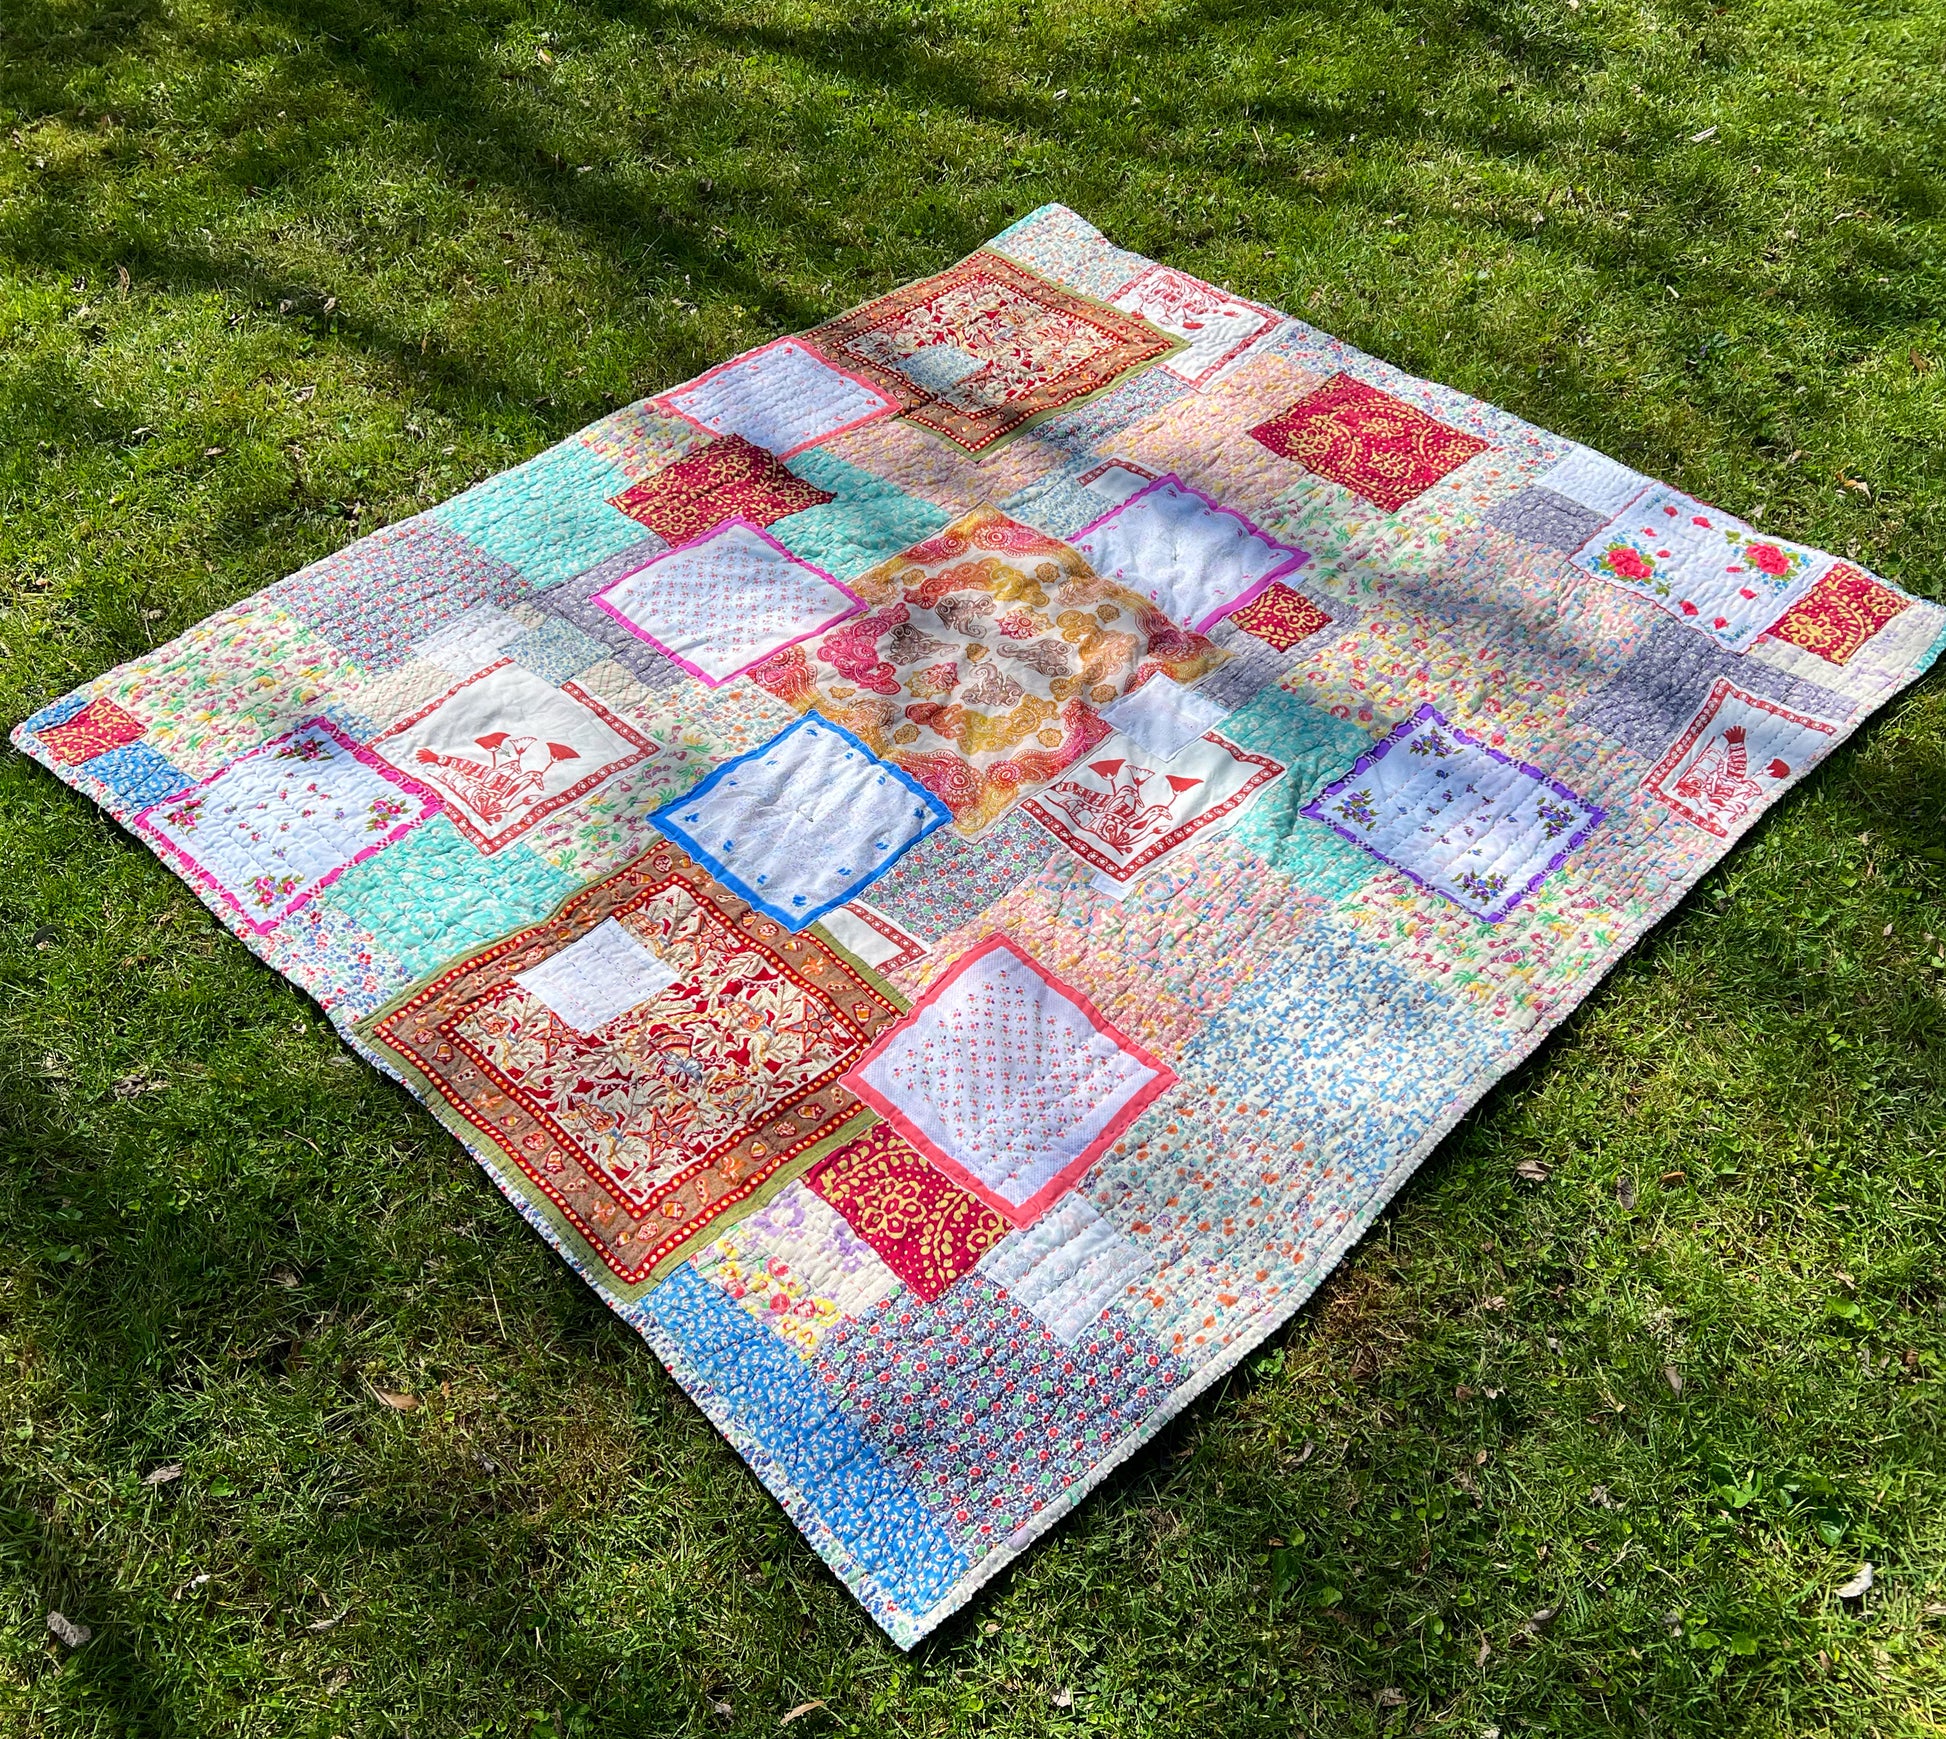 a beautiful vintage quilt, which has been mended and completely hand stitched all over, lays on a plush green lawn. Splotches of sunshine dance across the quilt top